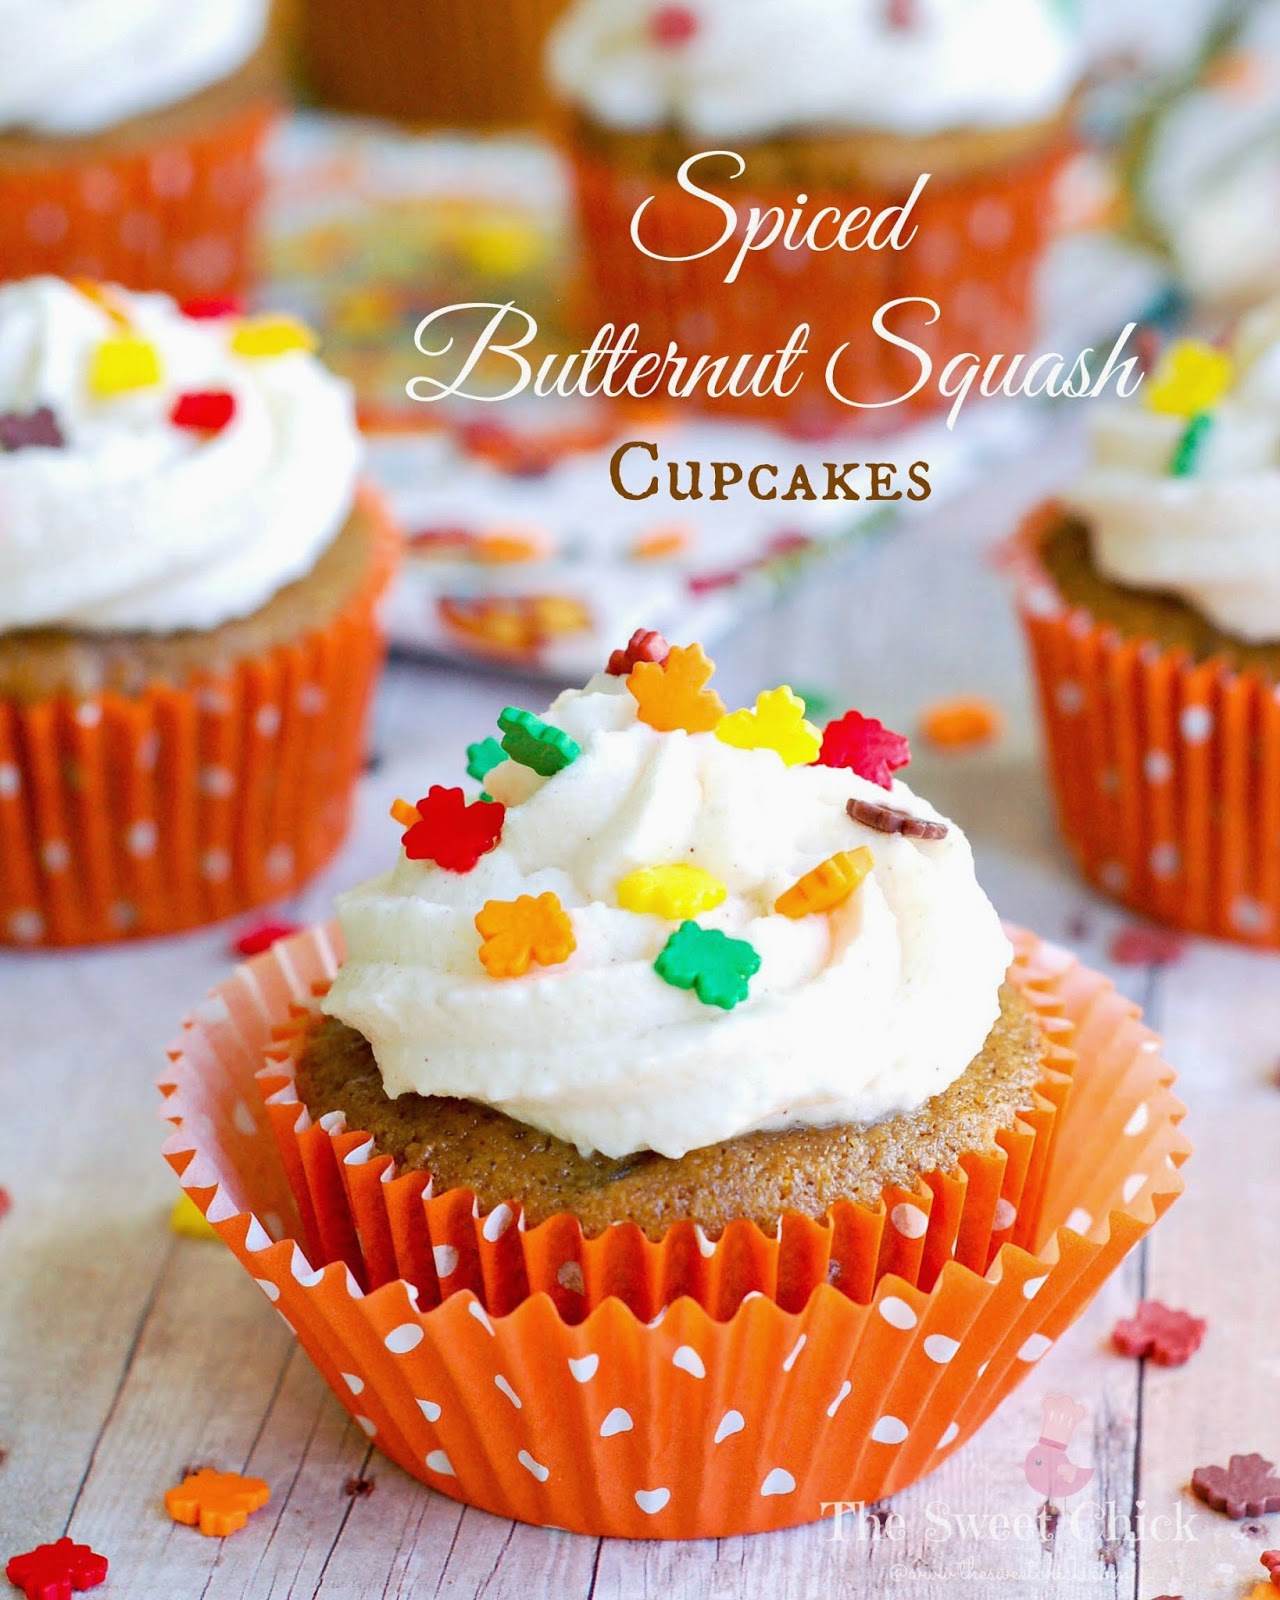 Spiced Butternut Squash Cupcakes by The Sweet Chick